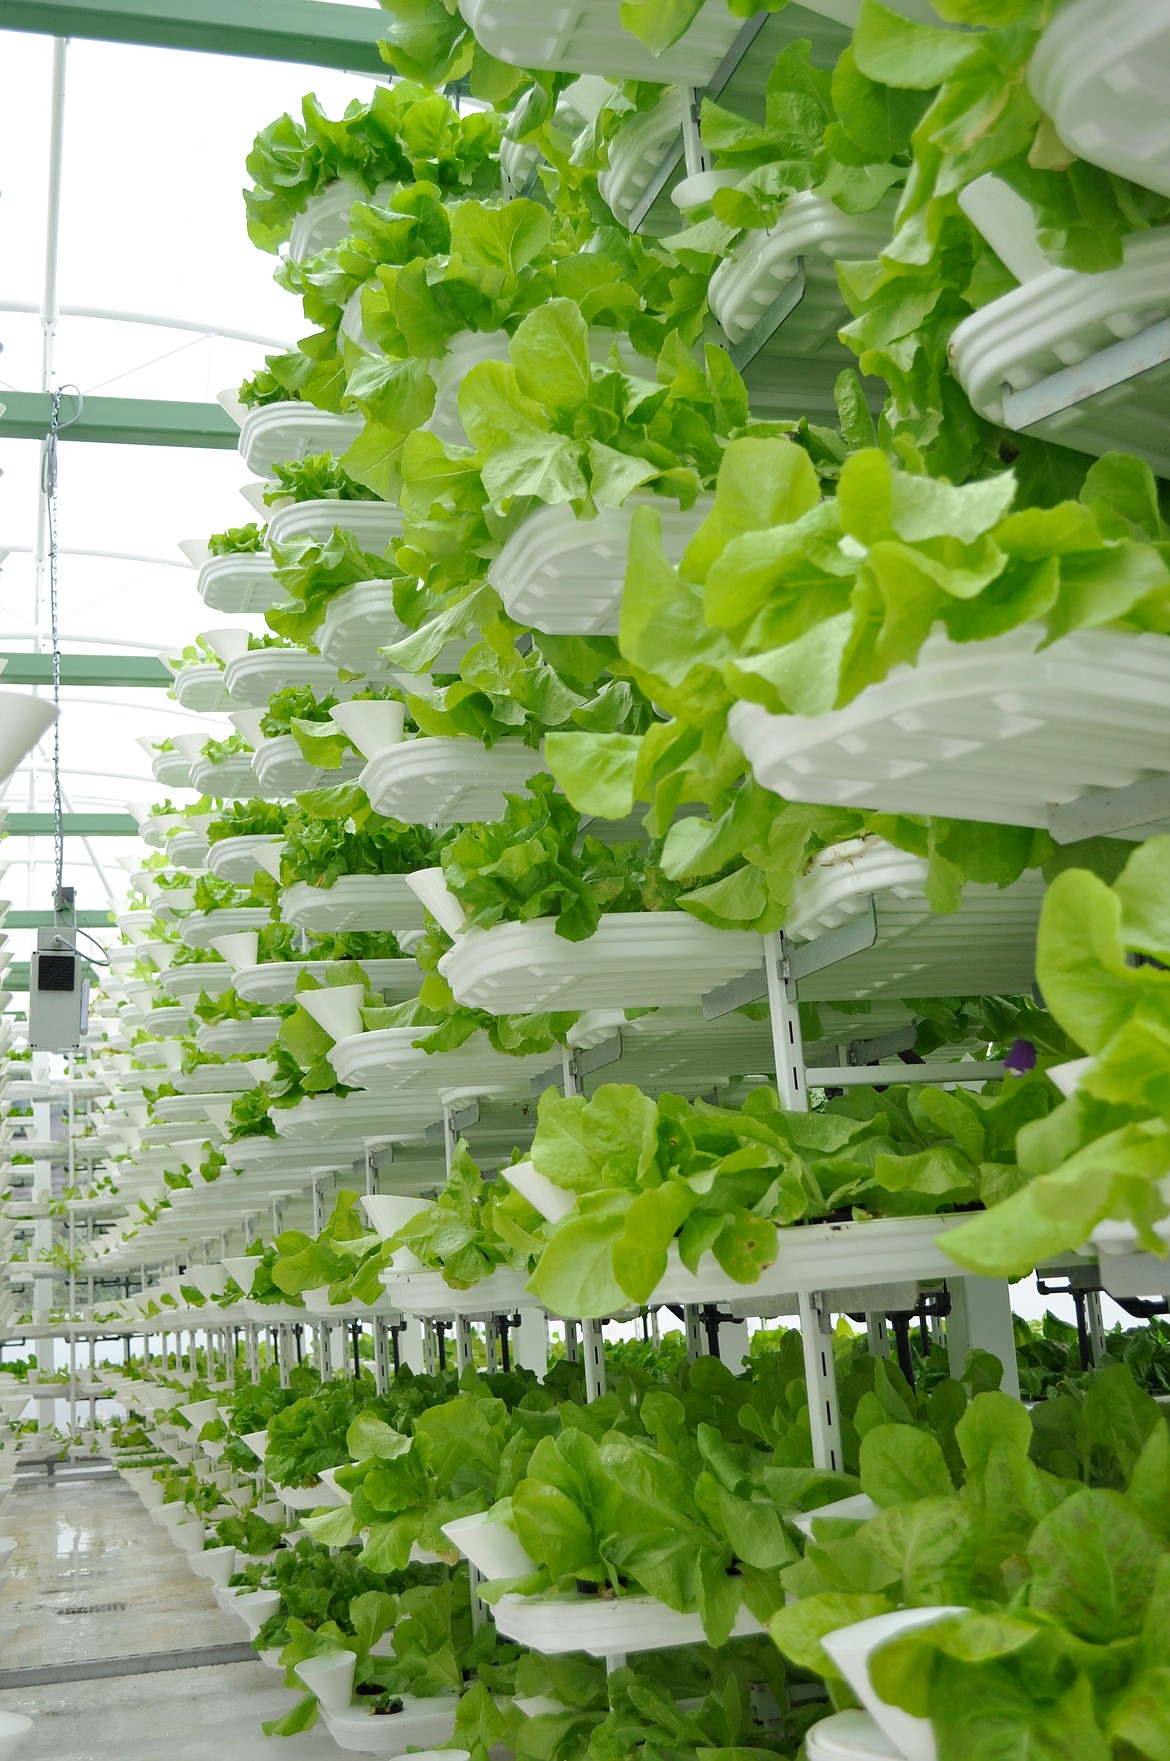 A vertical farm such as the one pictured is another form of indoor farming that benefits from year-round growing in a temperature-controlled environment.